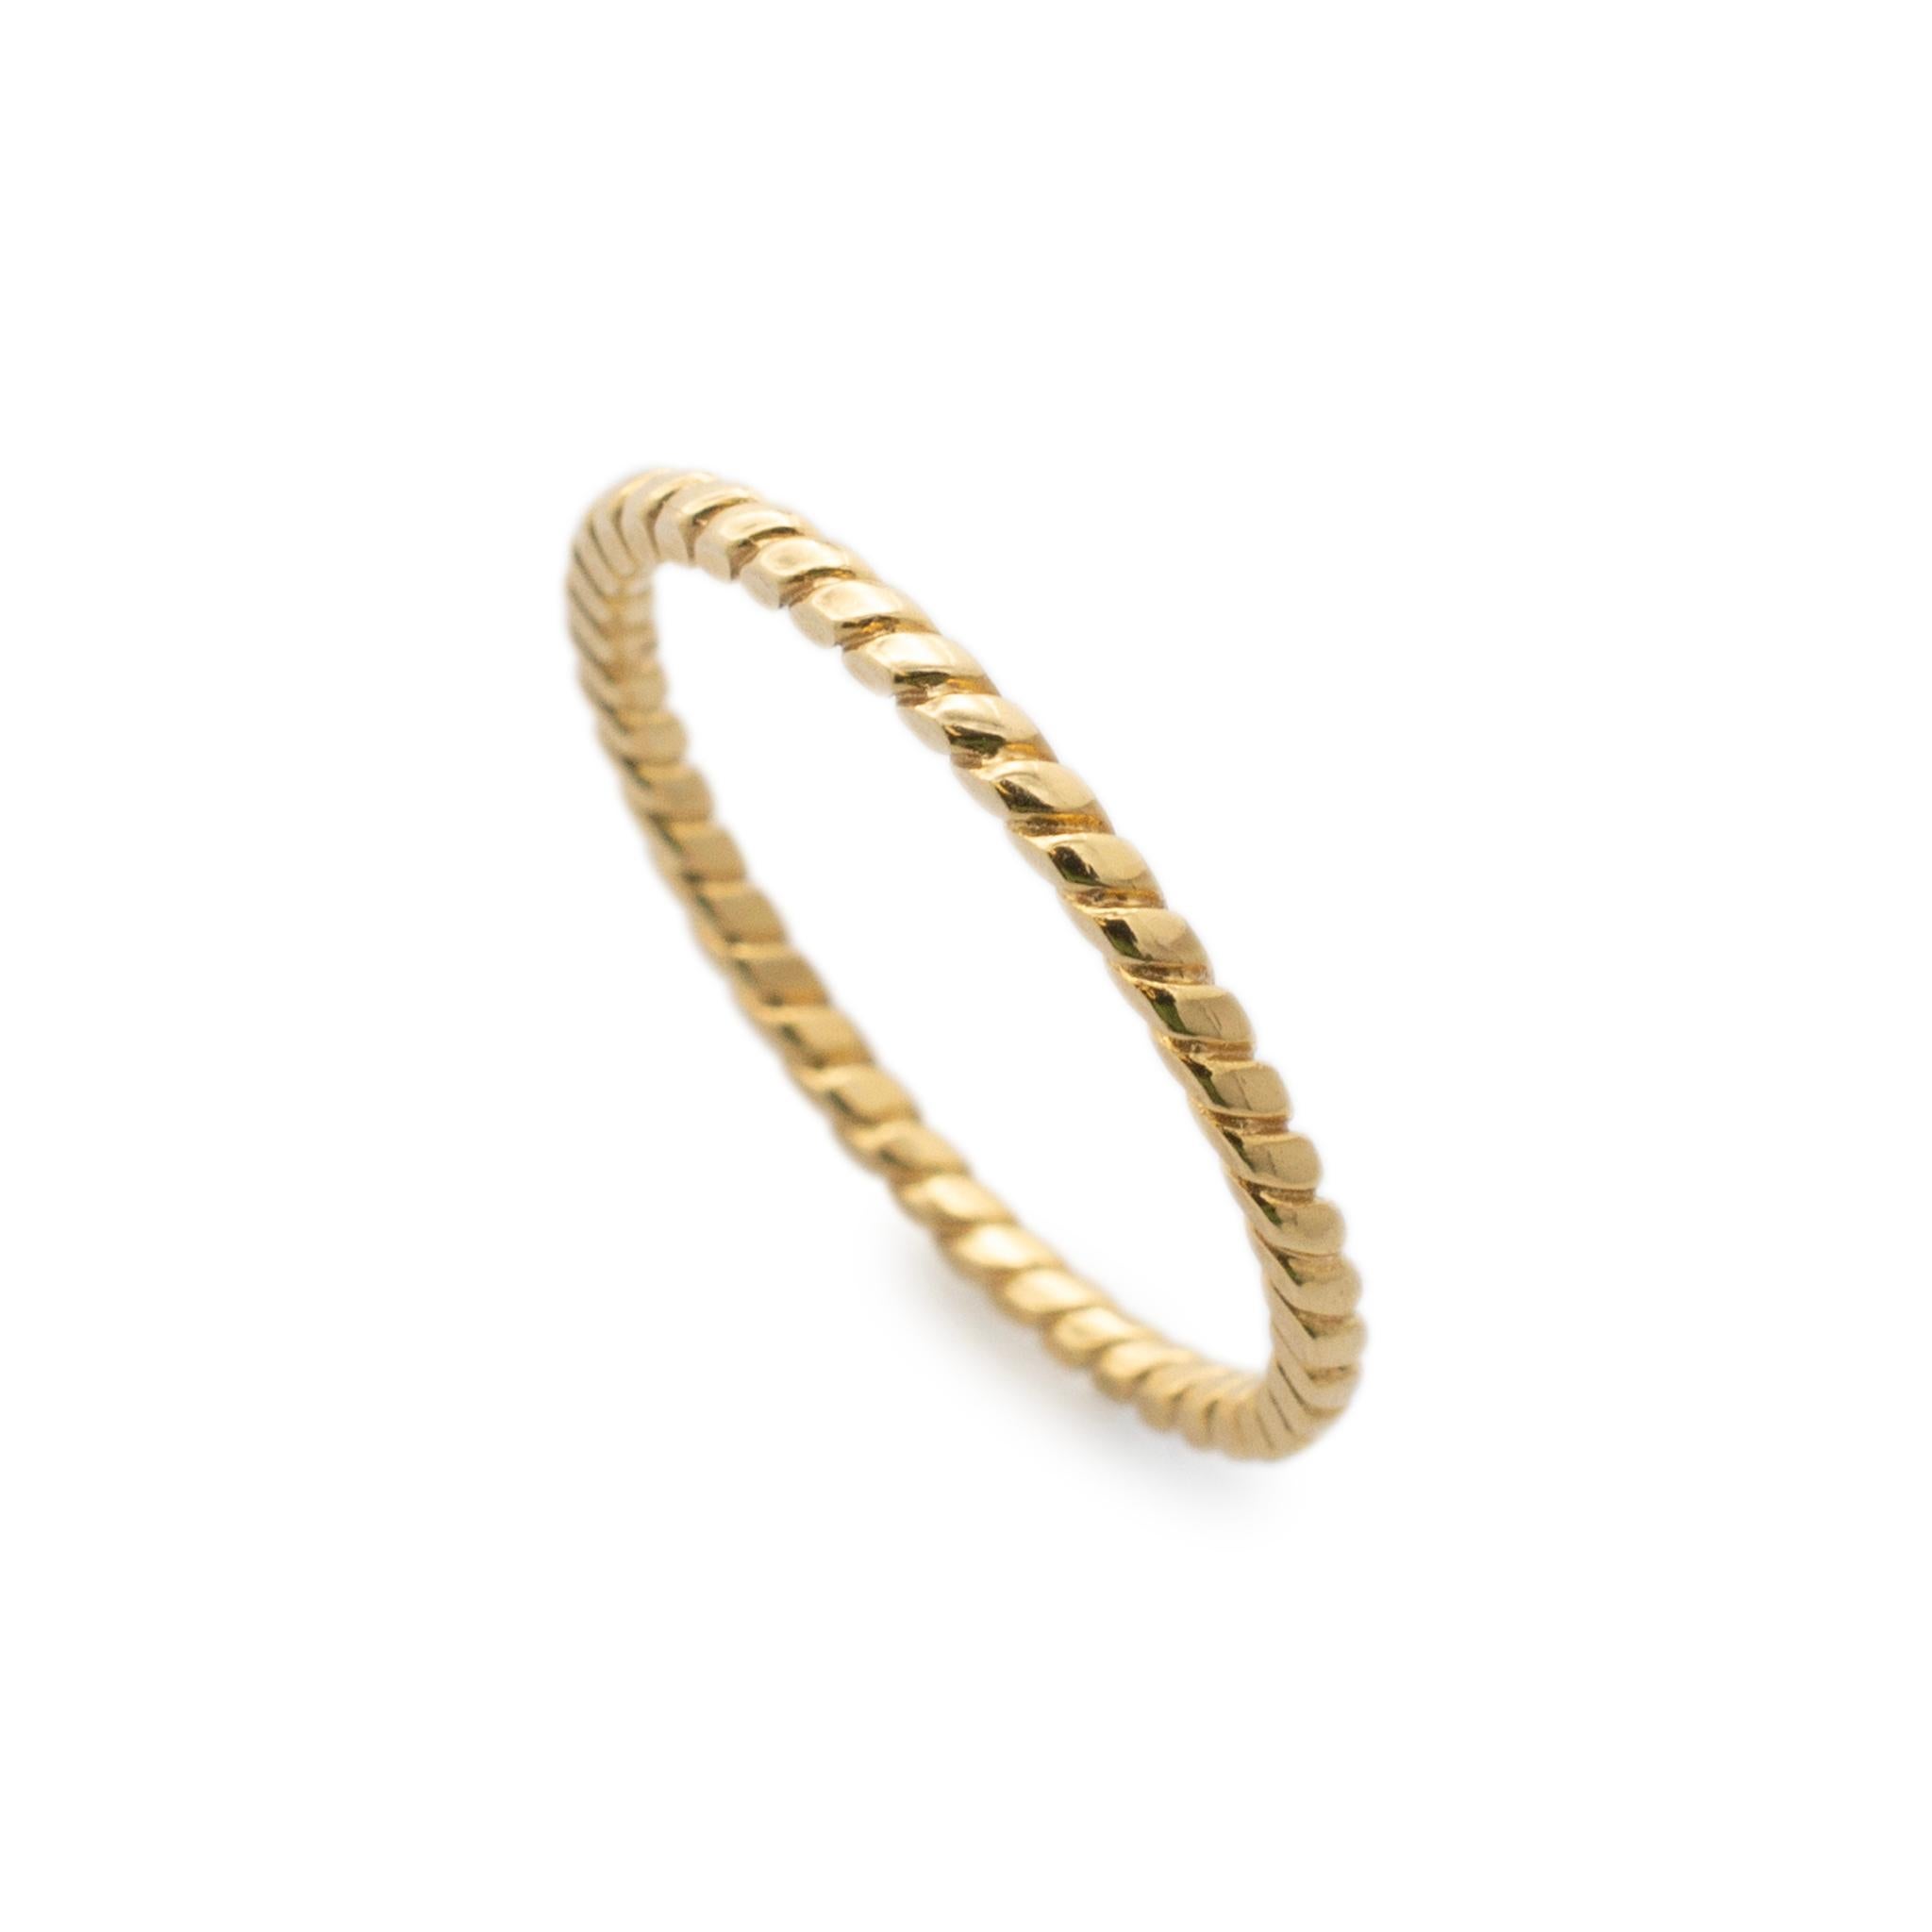 Gender: Ladies

Metal Type: 14K Yellow Gold

Size: 6

Shank Maximum Width: 1.30 mm

Weight: 1.10 Grams

Ladies 14K yellow gold twisted band with a half-round shank. The metal was tested and determined to be 14K yellow gold.

Pre-owned in excellent